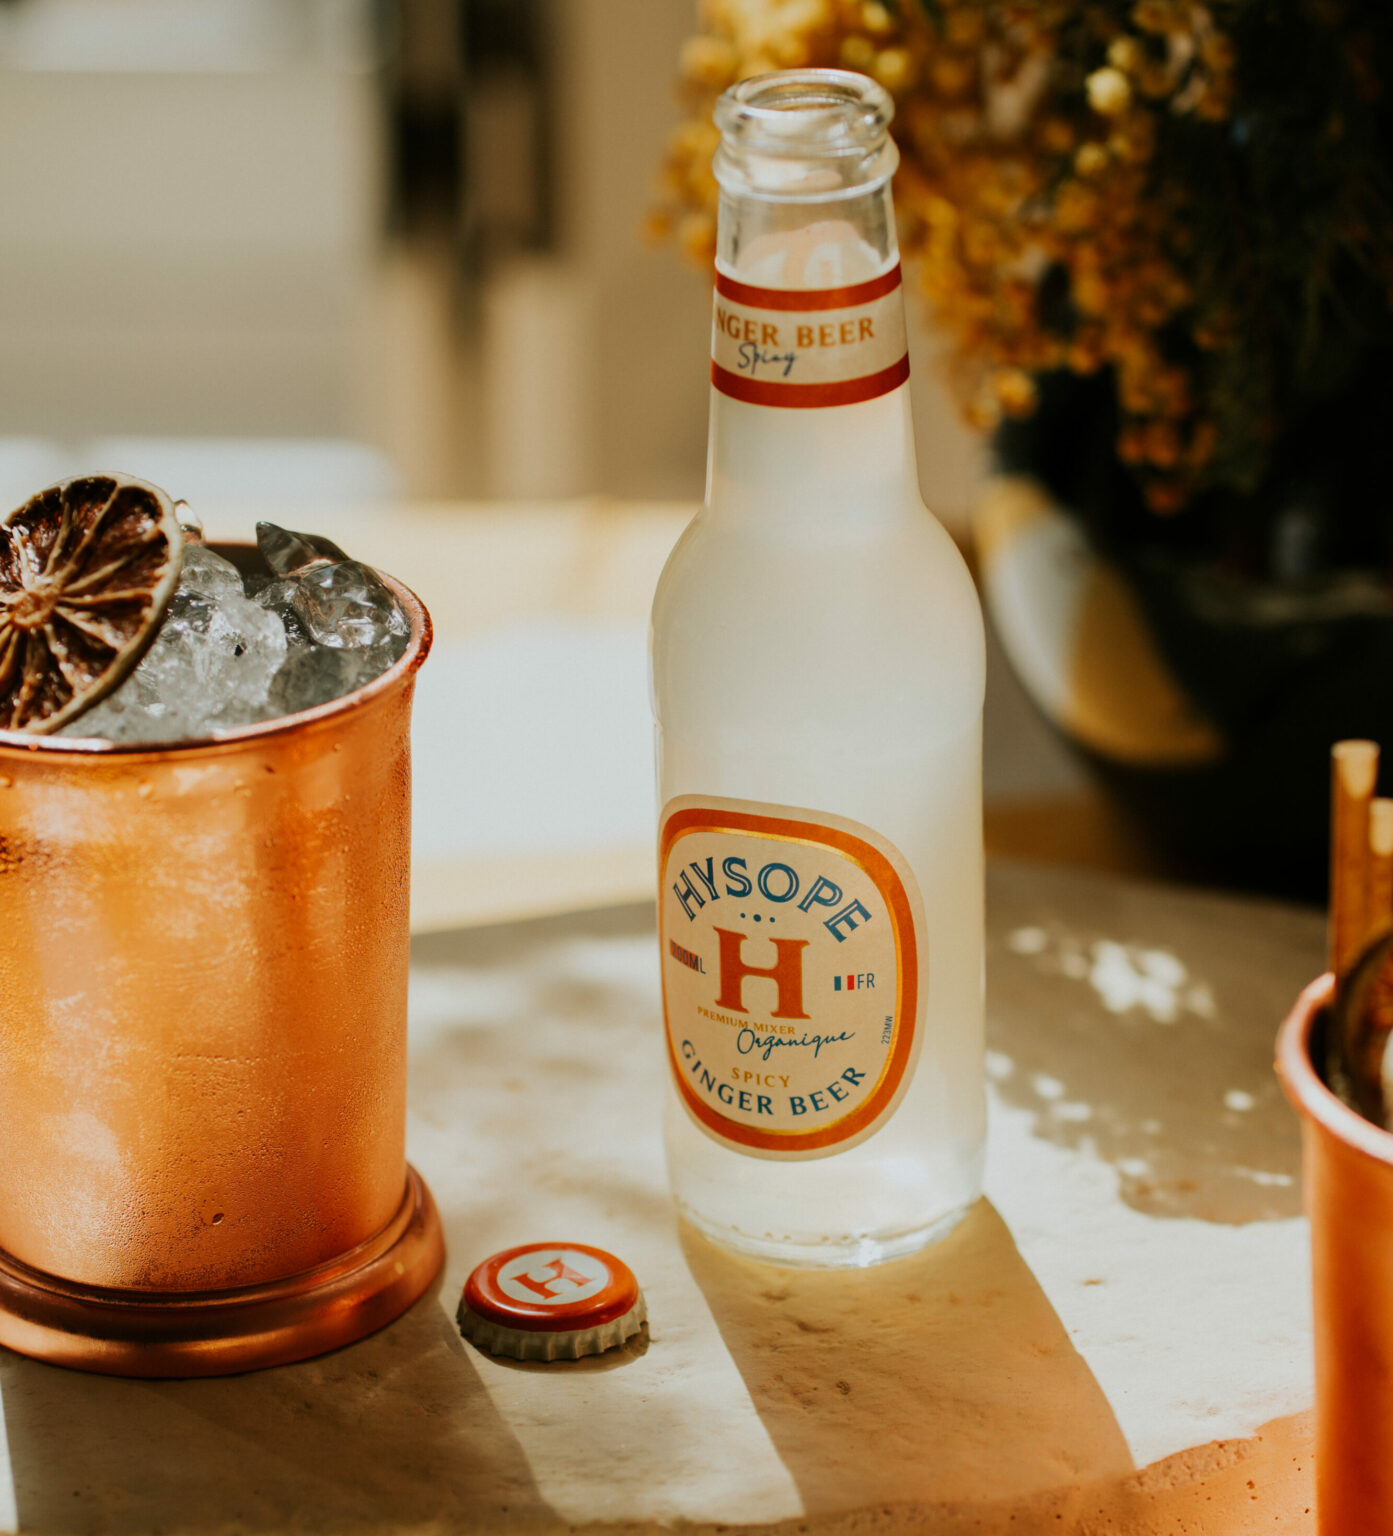 hysope premium mixers français bio cocktail ginger beer spicy vertiable moscow mule